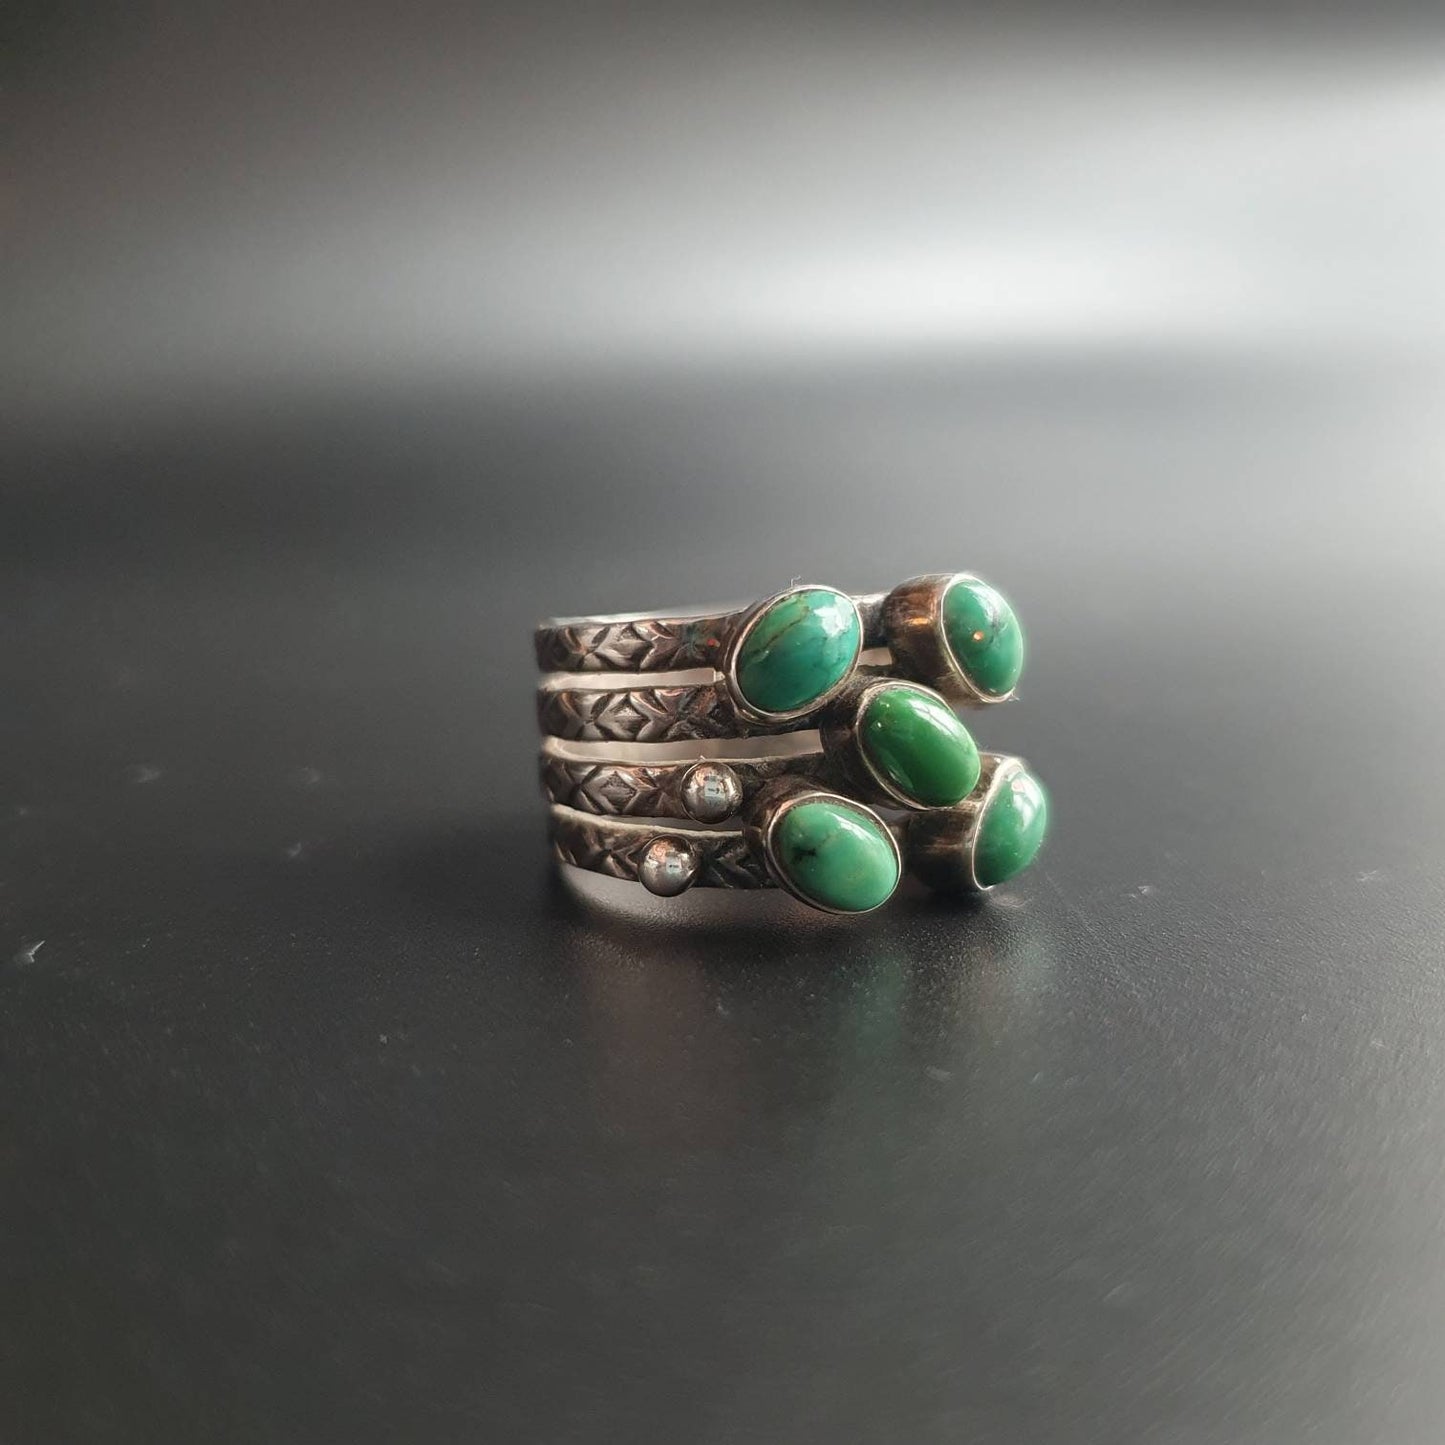 Turquoise ring, multi stone ring, sterling silver jewelry, vintage, handmade, stackable rings, statement jewelry, gifts, unisex, Navajo